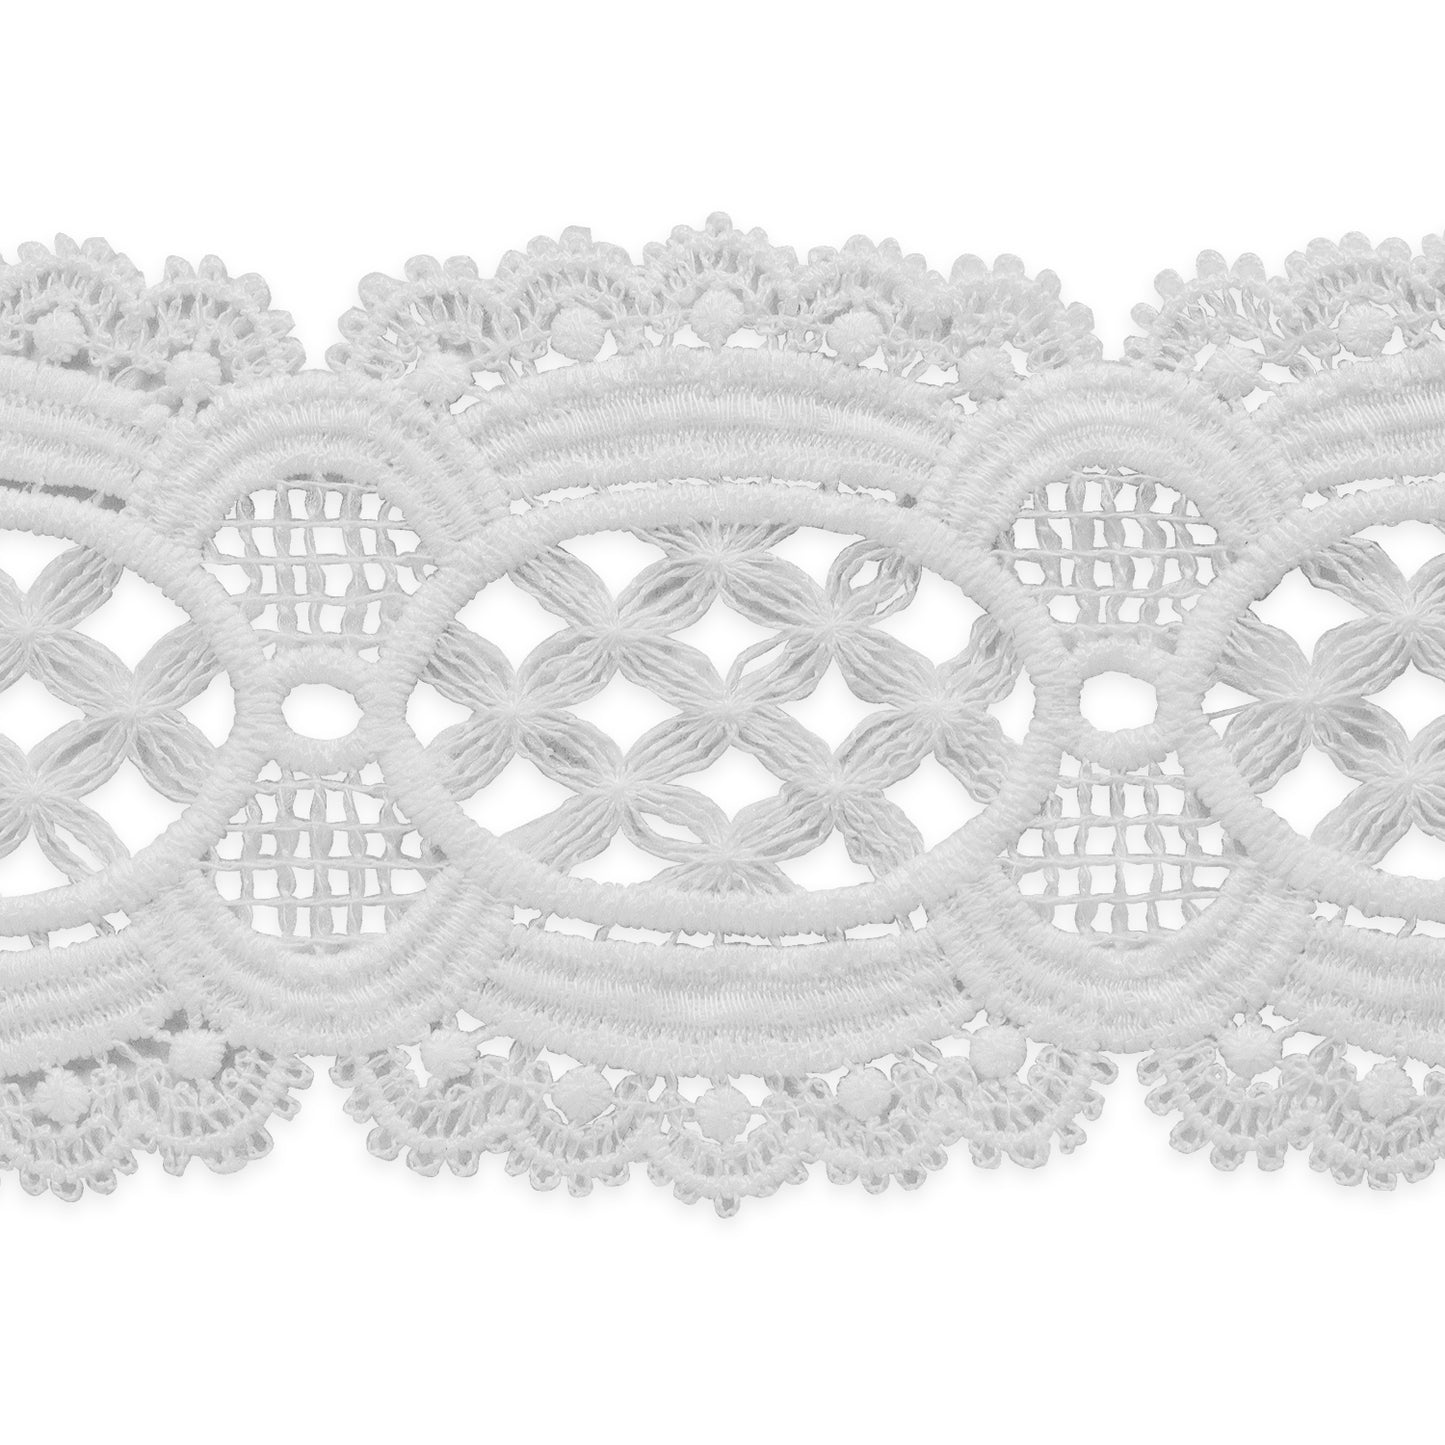 Veronica Embroidered Designer Venice Lace Trim (Sold by the Yard)